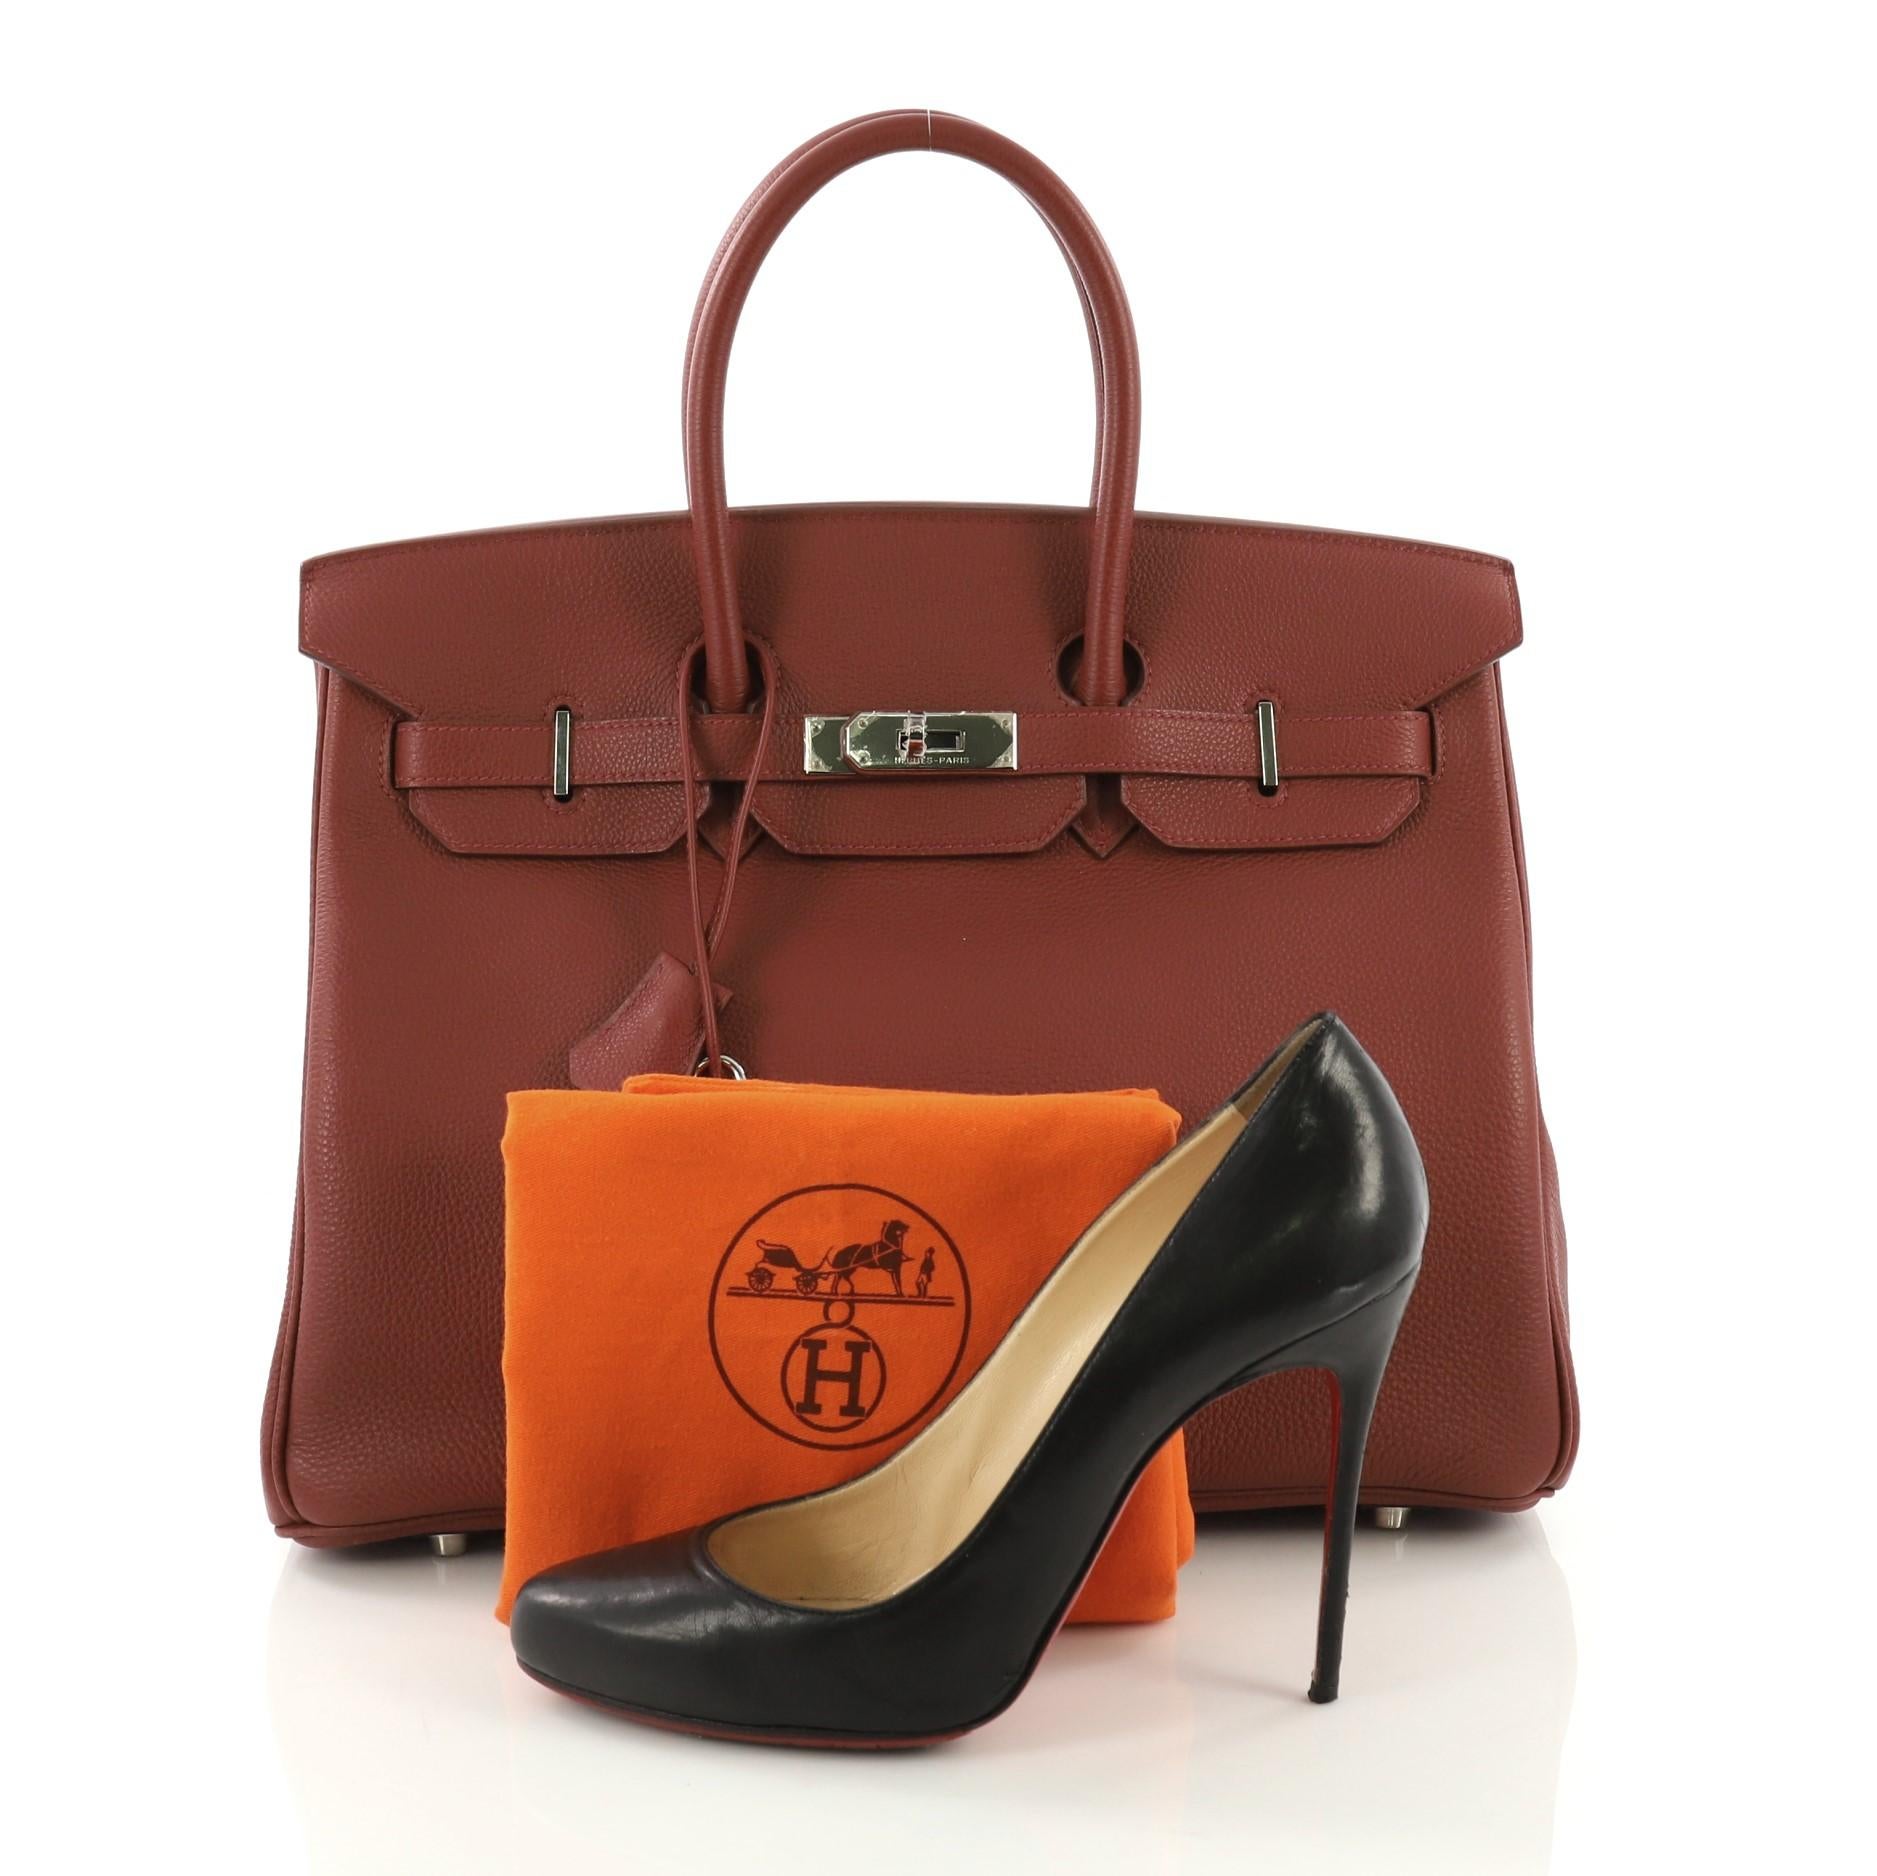 This Hermes Birkin Handbag Red Togo with Palladium Hardware 35, crafted in Sienne red leather, features dual rolled top handles, protective base studs, and palladium-tone hardware. Its turn-lock closure opens to a red leather interior with zip and